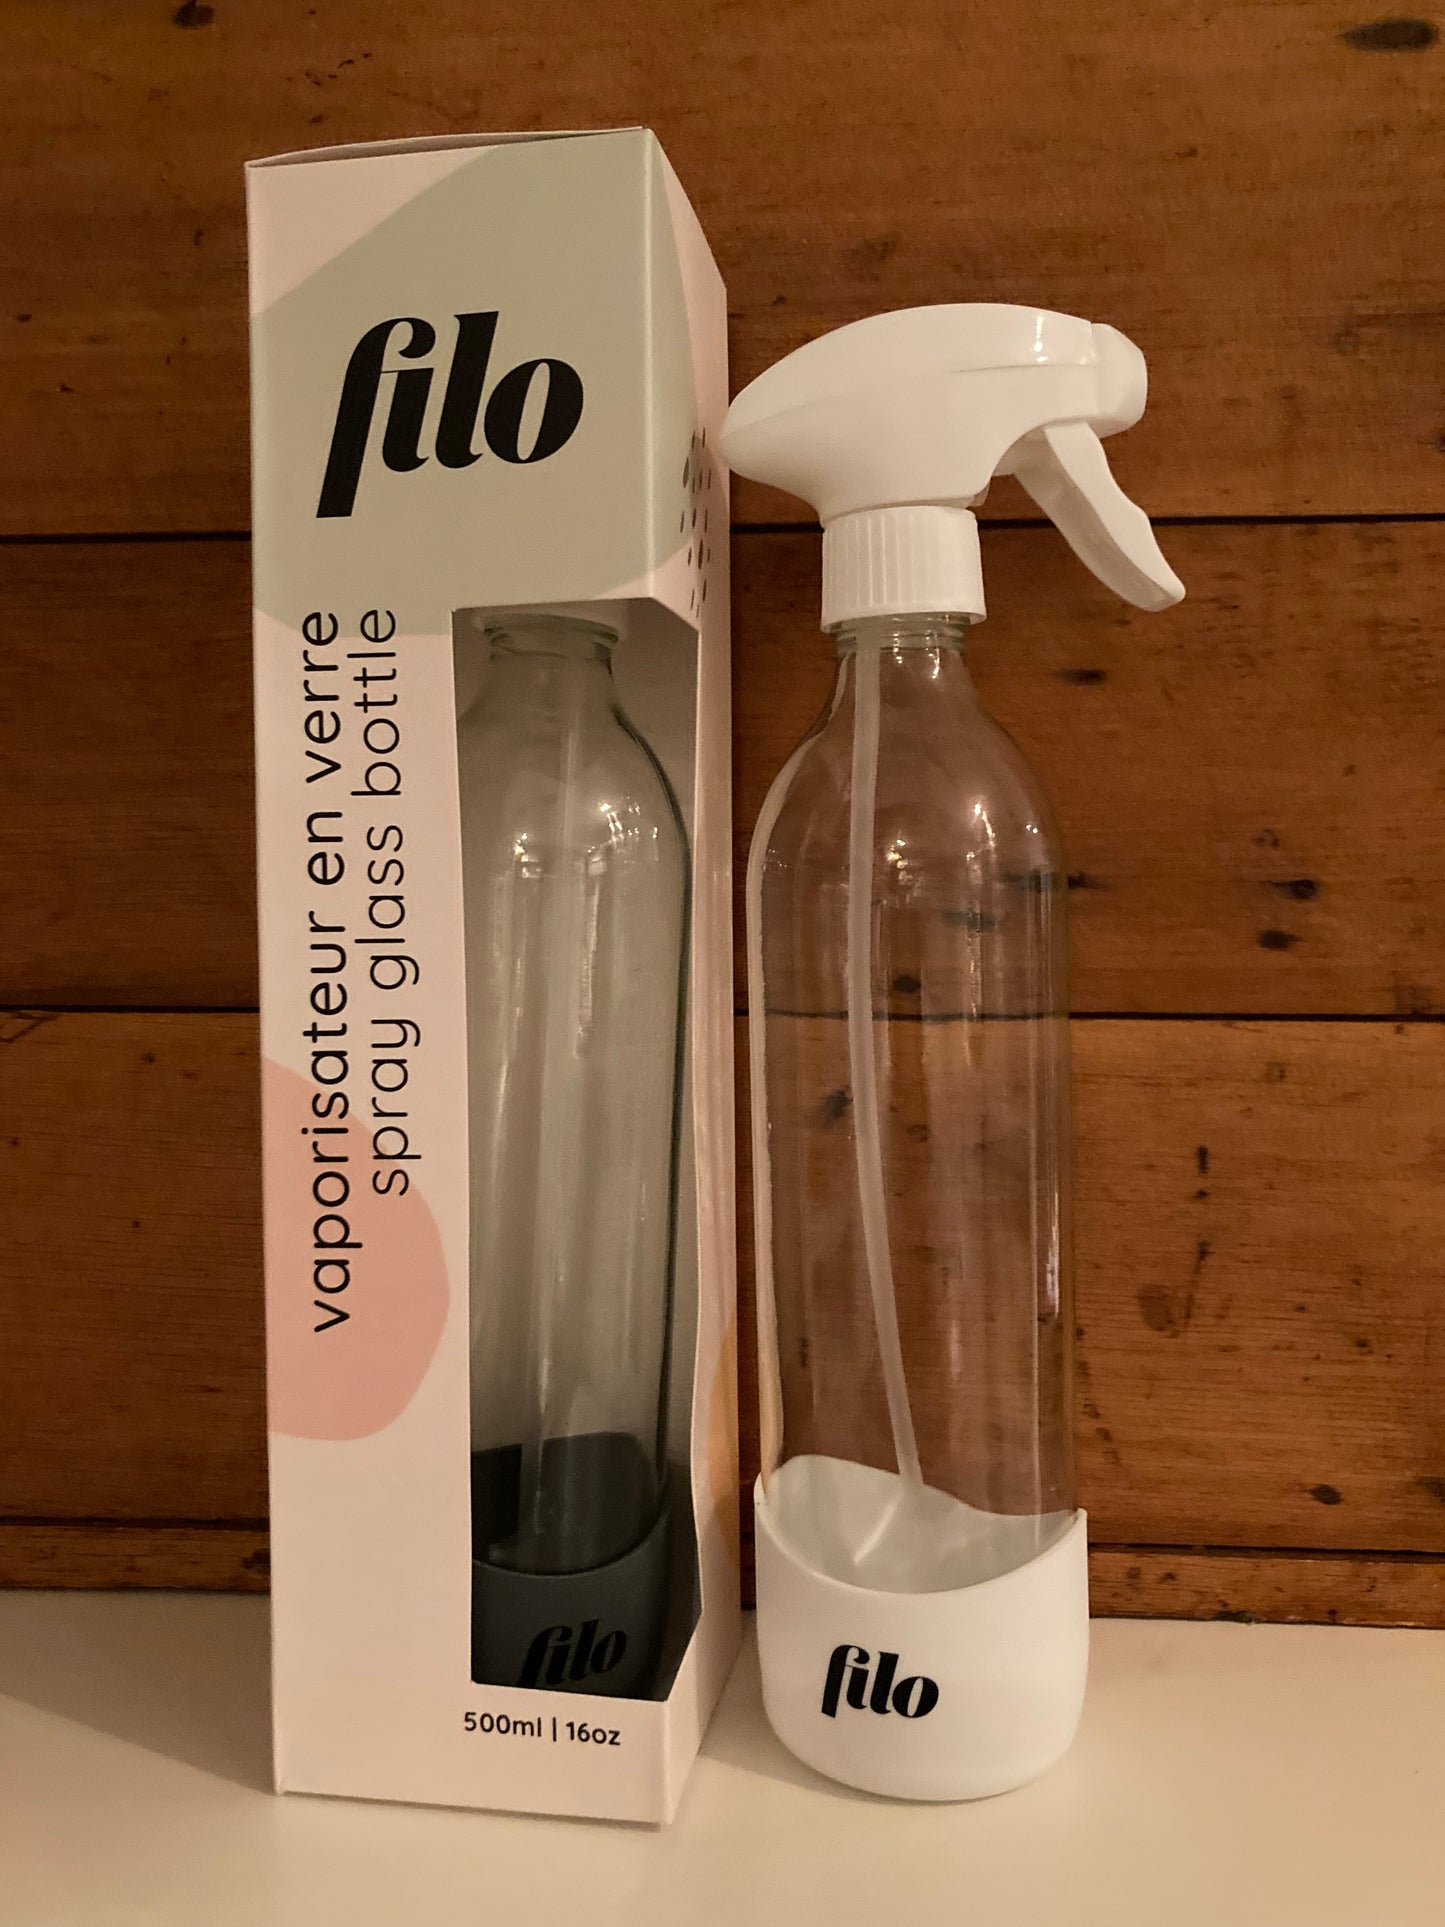 EcoHome - Filo GLASS, WINDOW & MIRROR CLEANER, “in a CAPSULE”